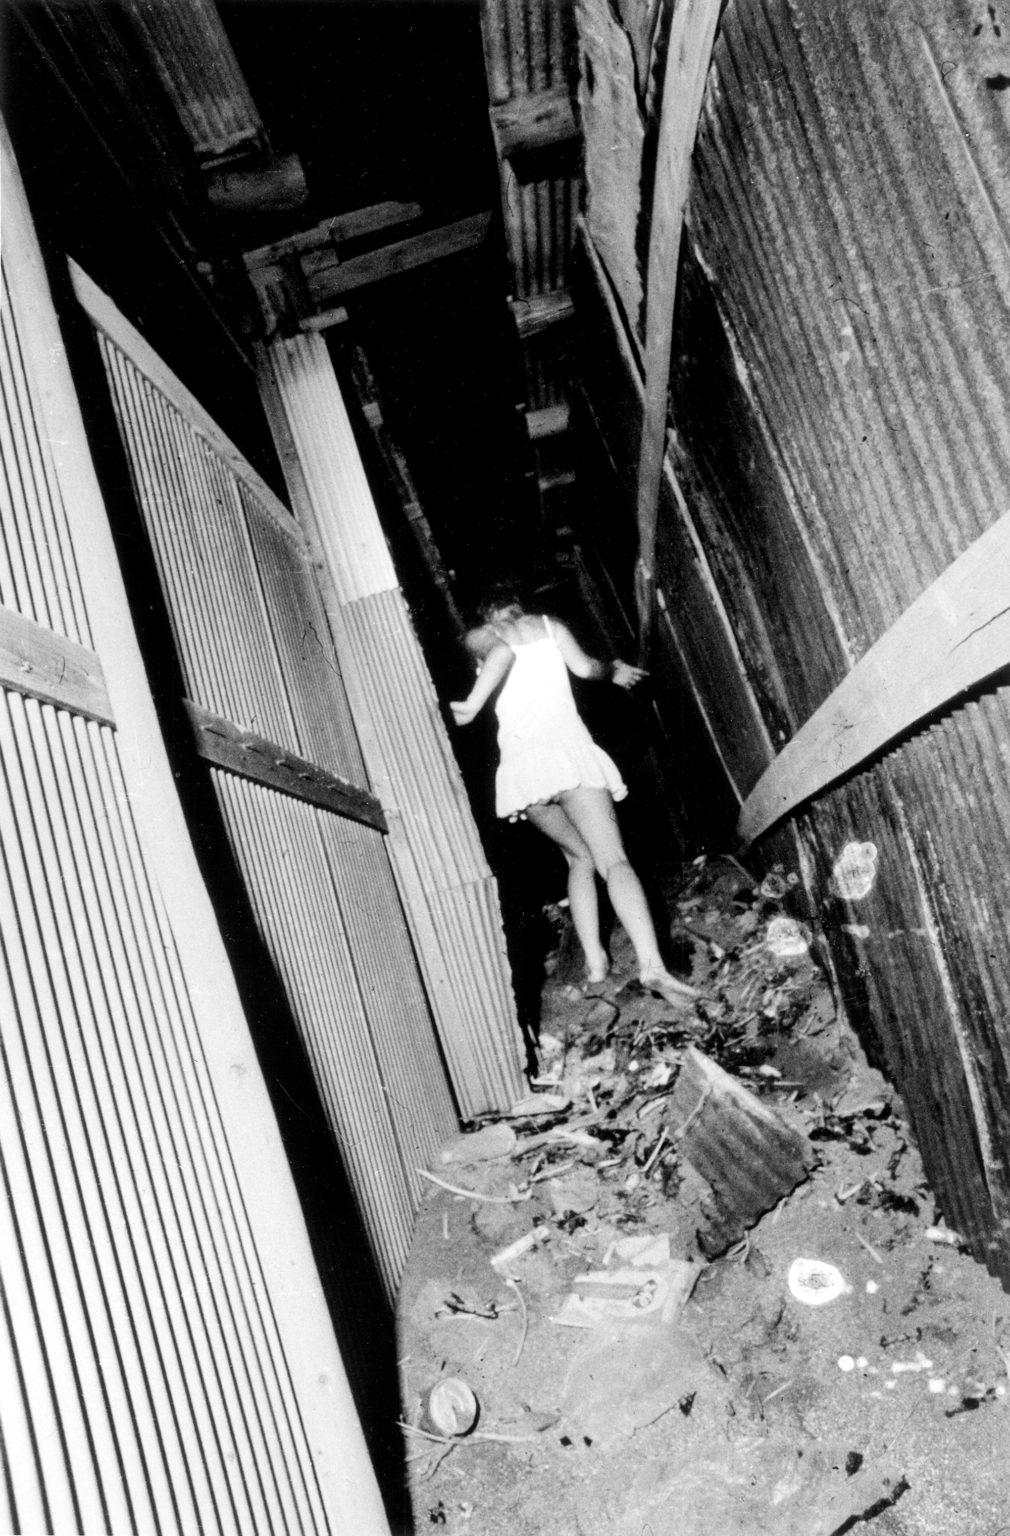 Signed Daido Moriyama photograph: Yokosuka, A Japanese Town 1971/2020:

A signature Daido Moriyama grainy, black & white, high contrast depiction of an anonymous girl in a white dress running up a debris-filled alleyway.

Silver Gelatin Print; 8x10